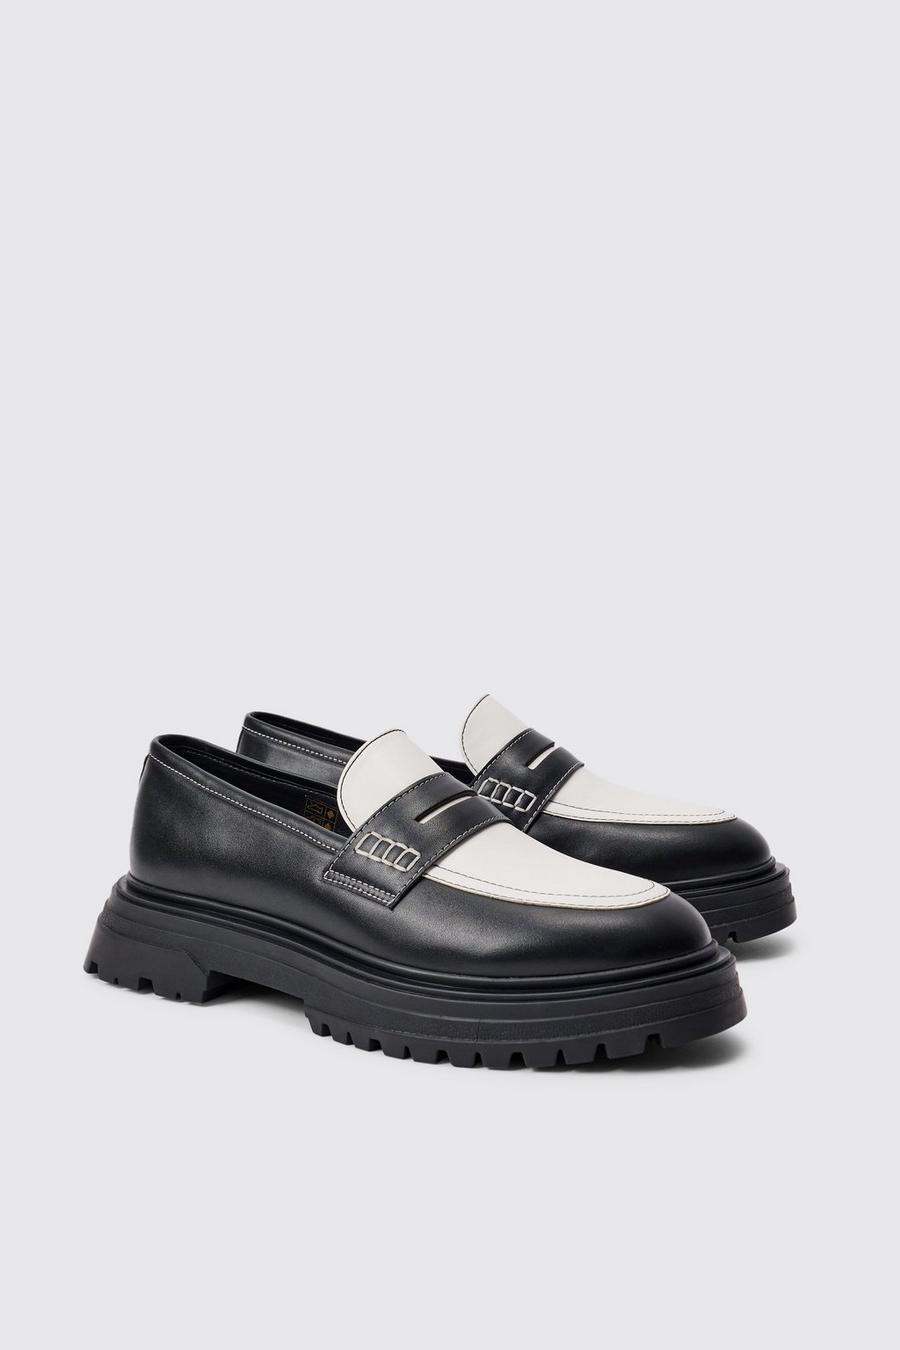 PU Slip On Contrast Chunky Loafer In Black image number 1